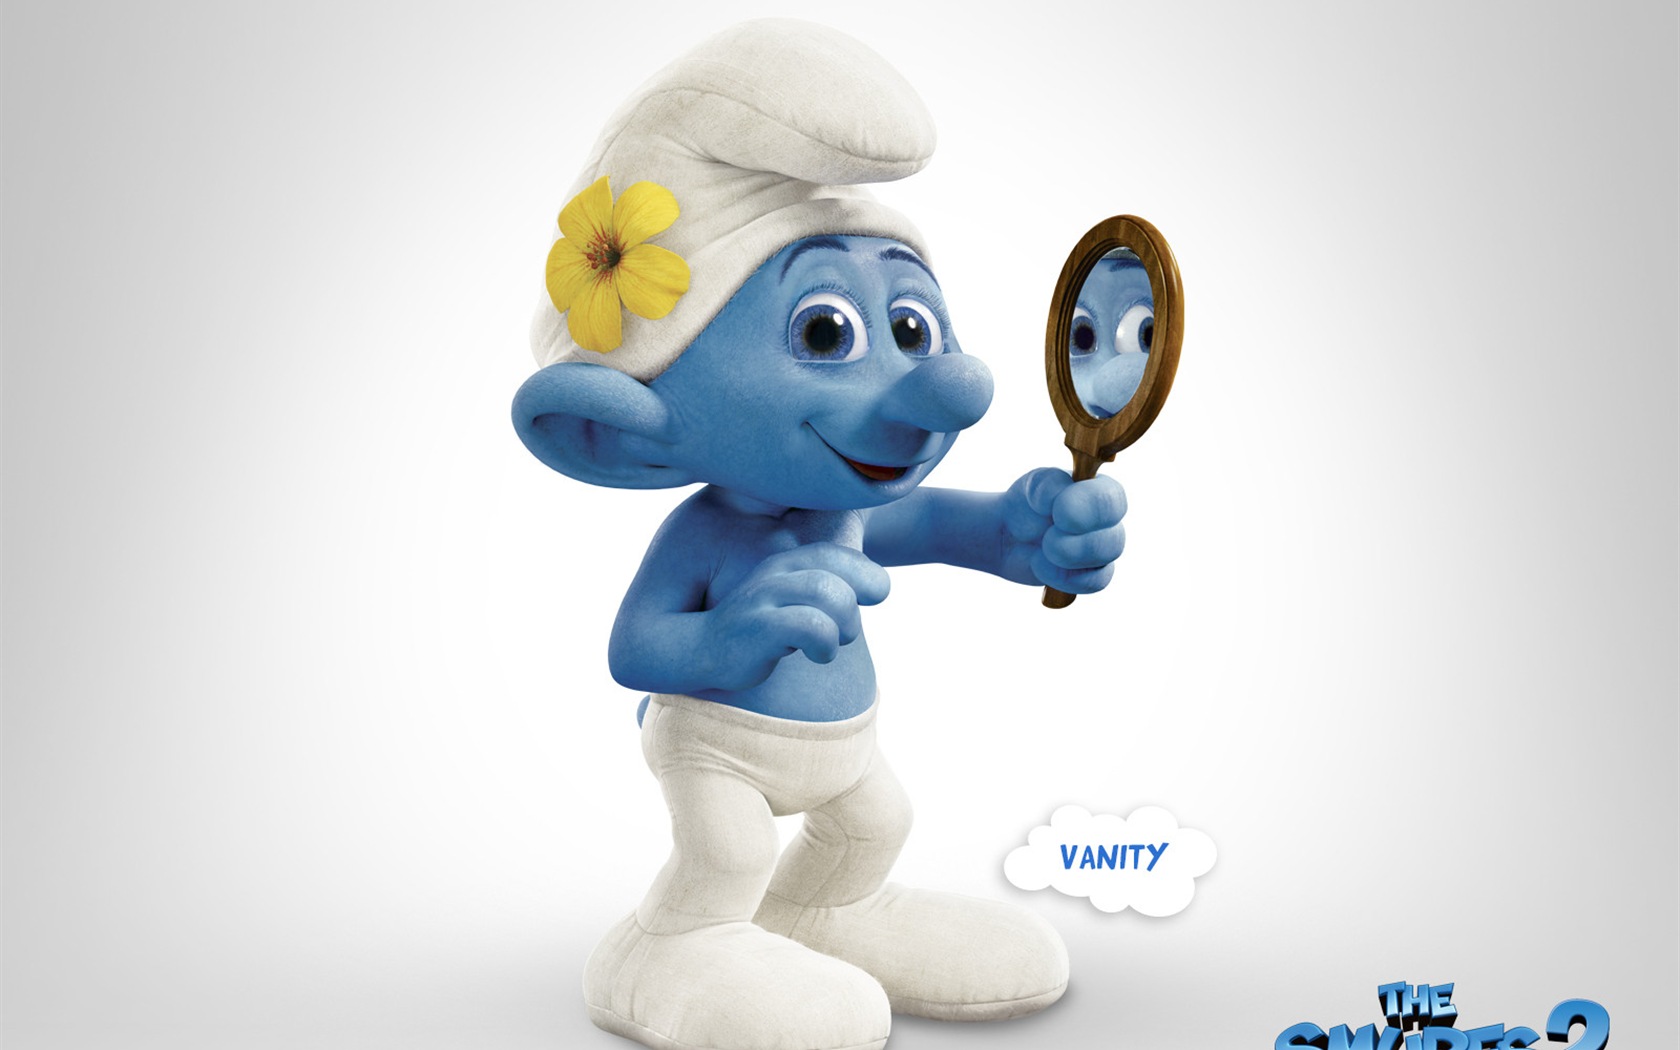 The Smurfs 2 HD movie wallpapers #10 - 1680x1050